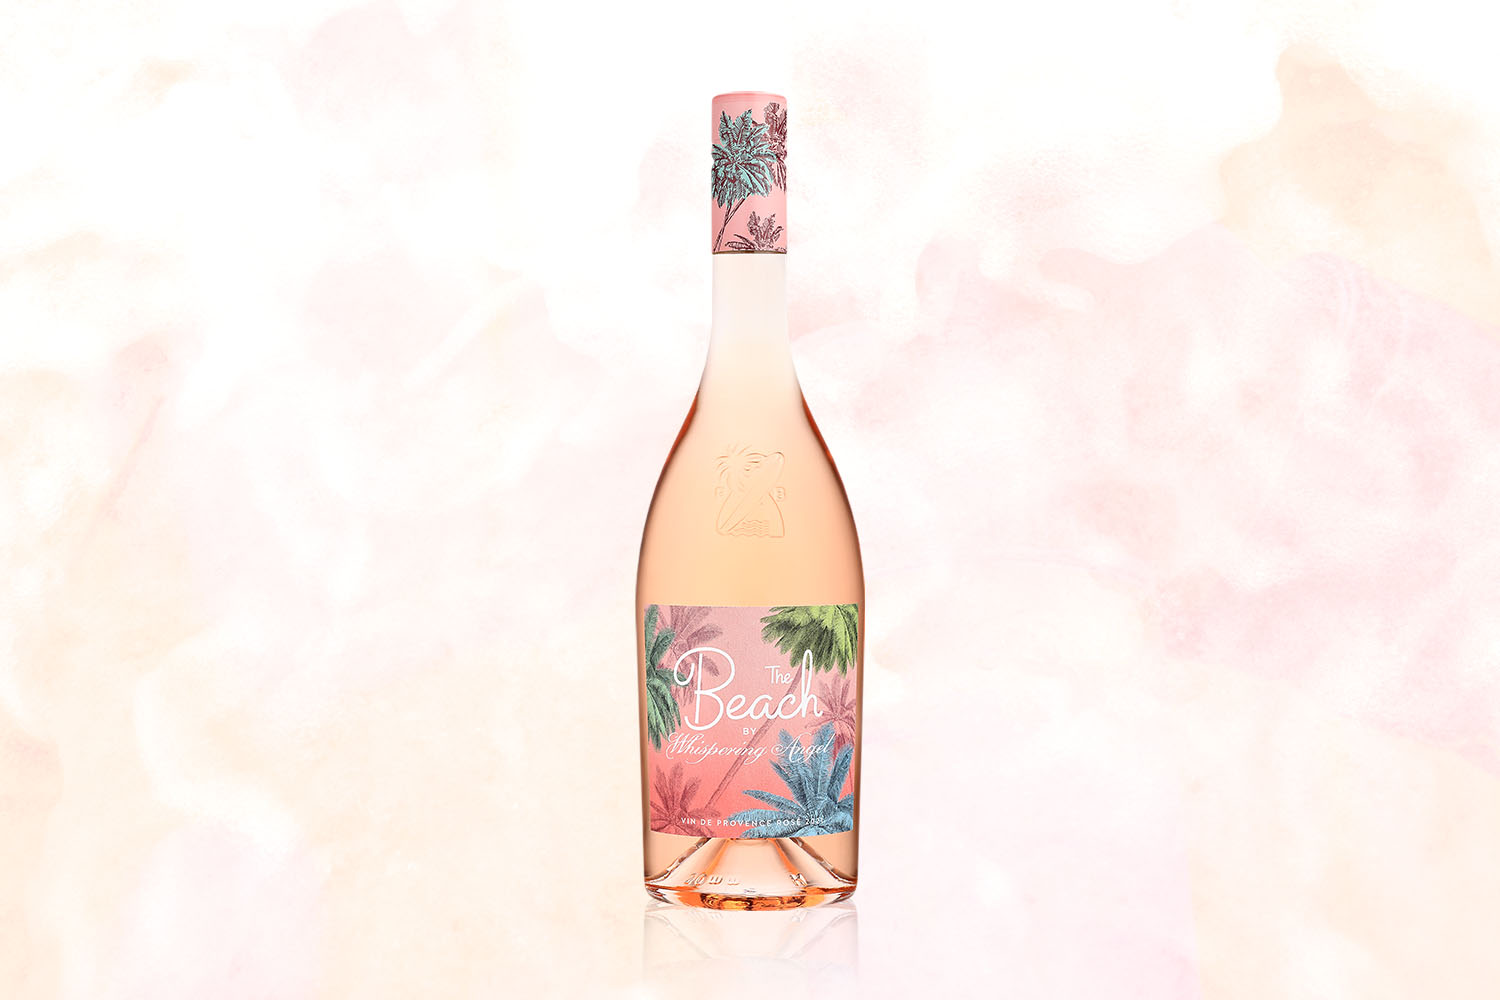 A bottle of The Beach By Whispering Angel on a pale pink background